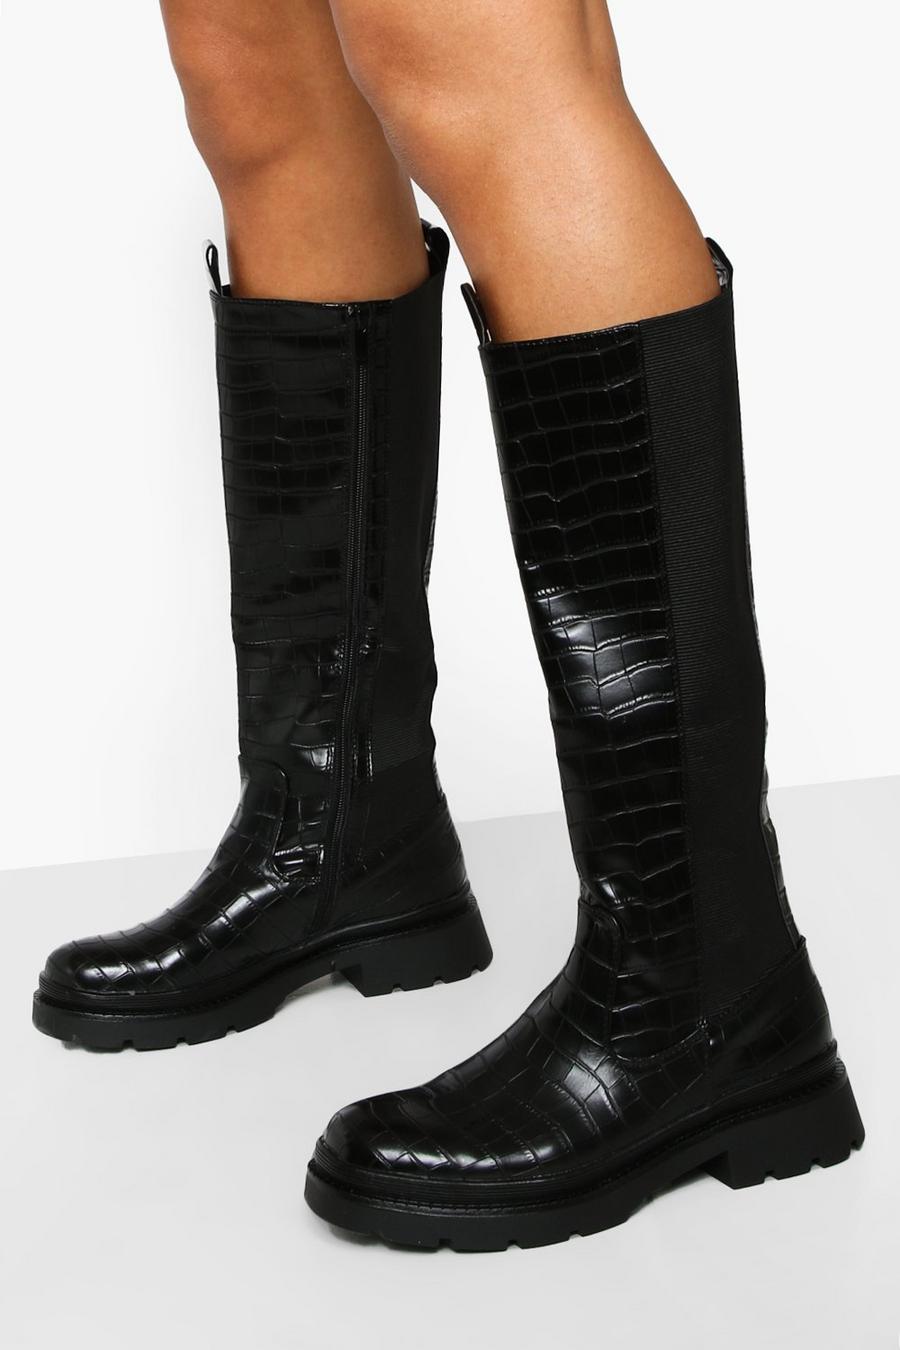 Black Croc Knee High Chunky Riding Boots image number 1